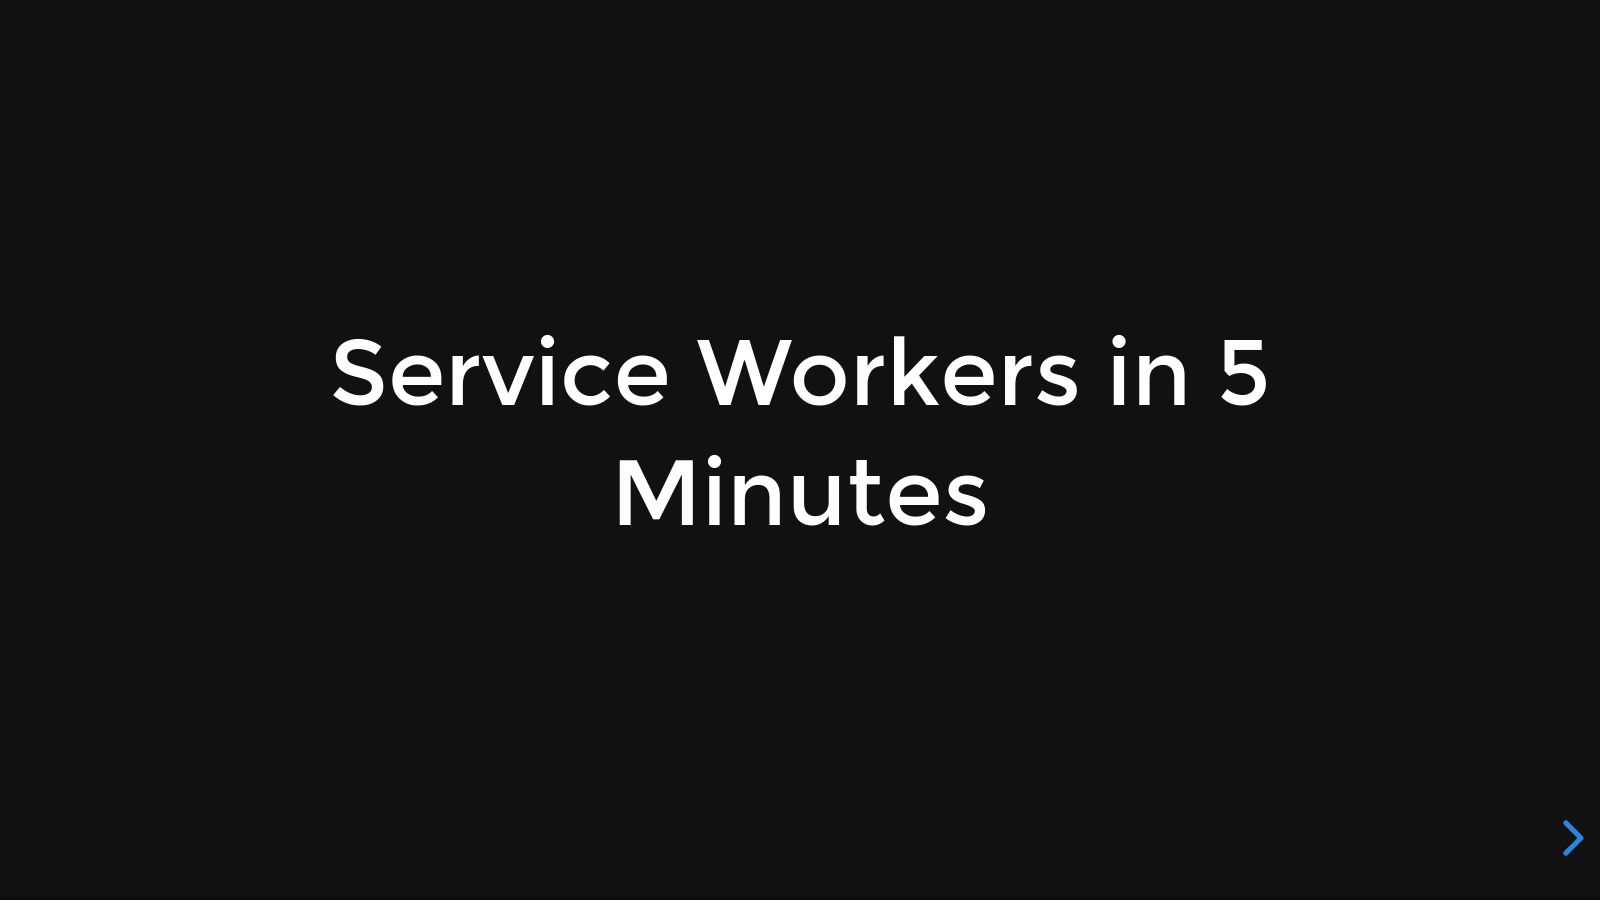 Service Workers in 5 Minutes